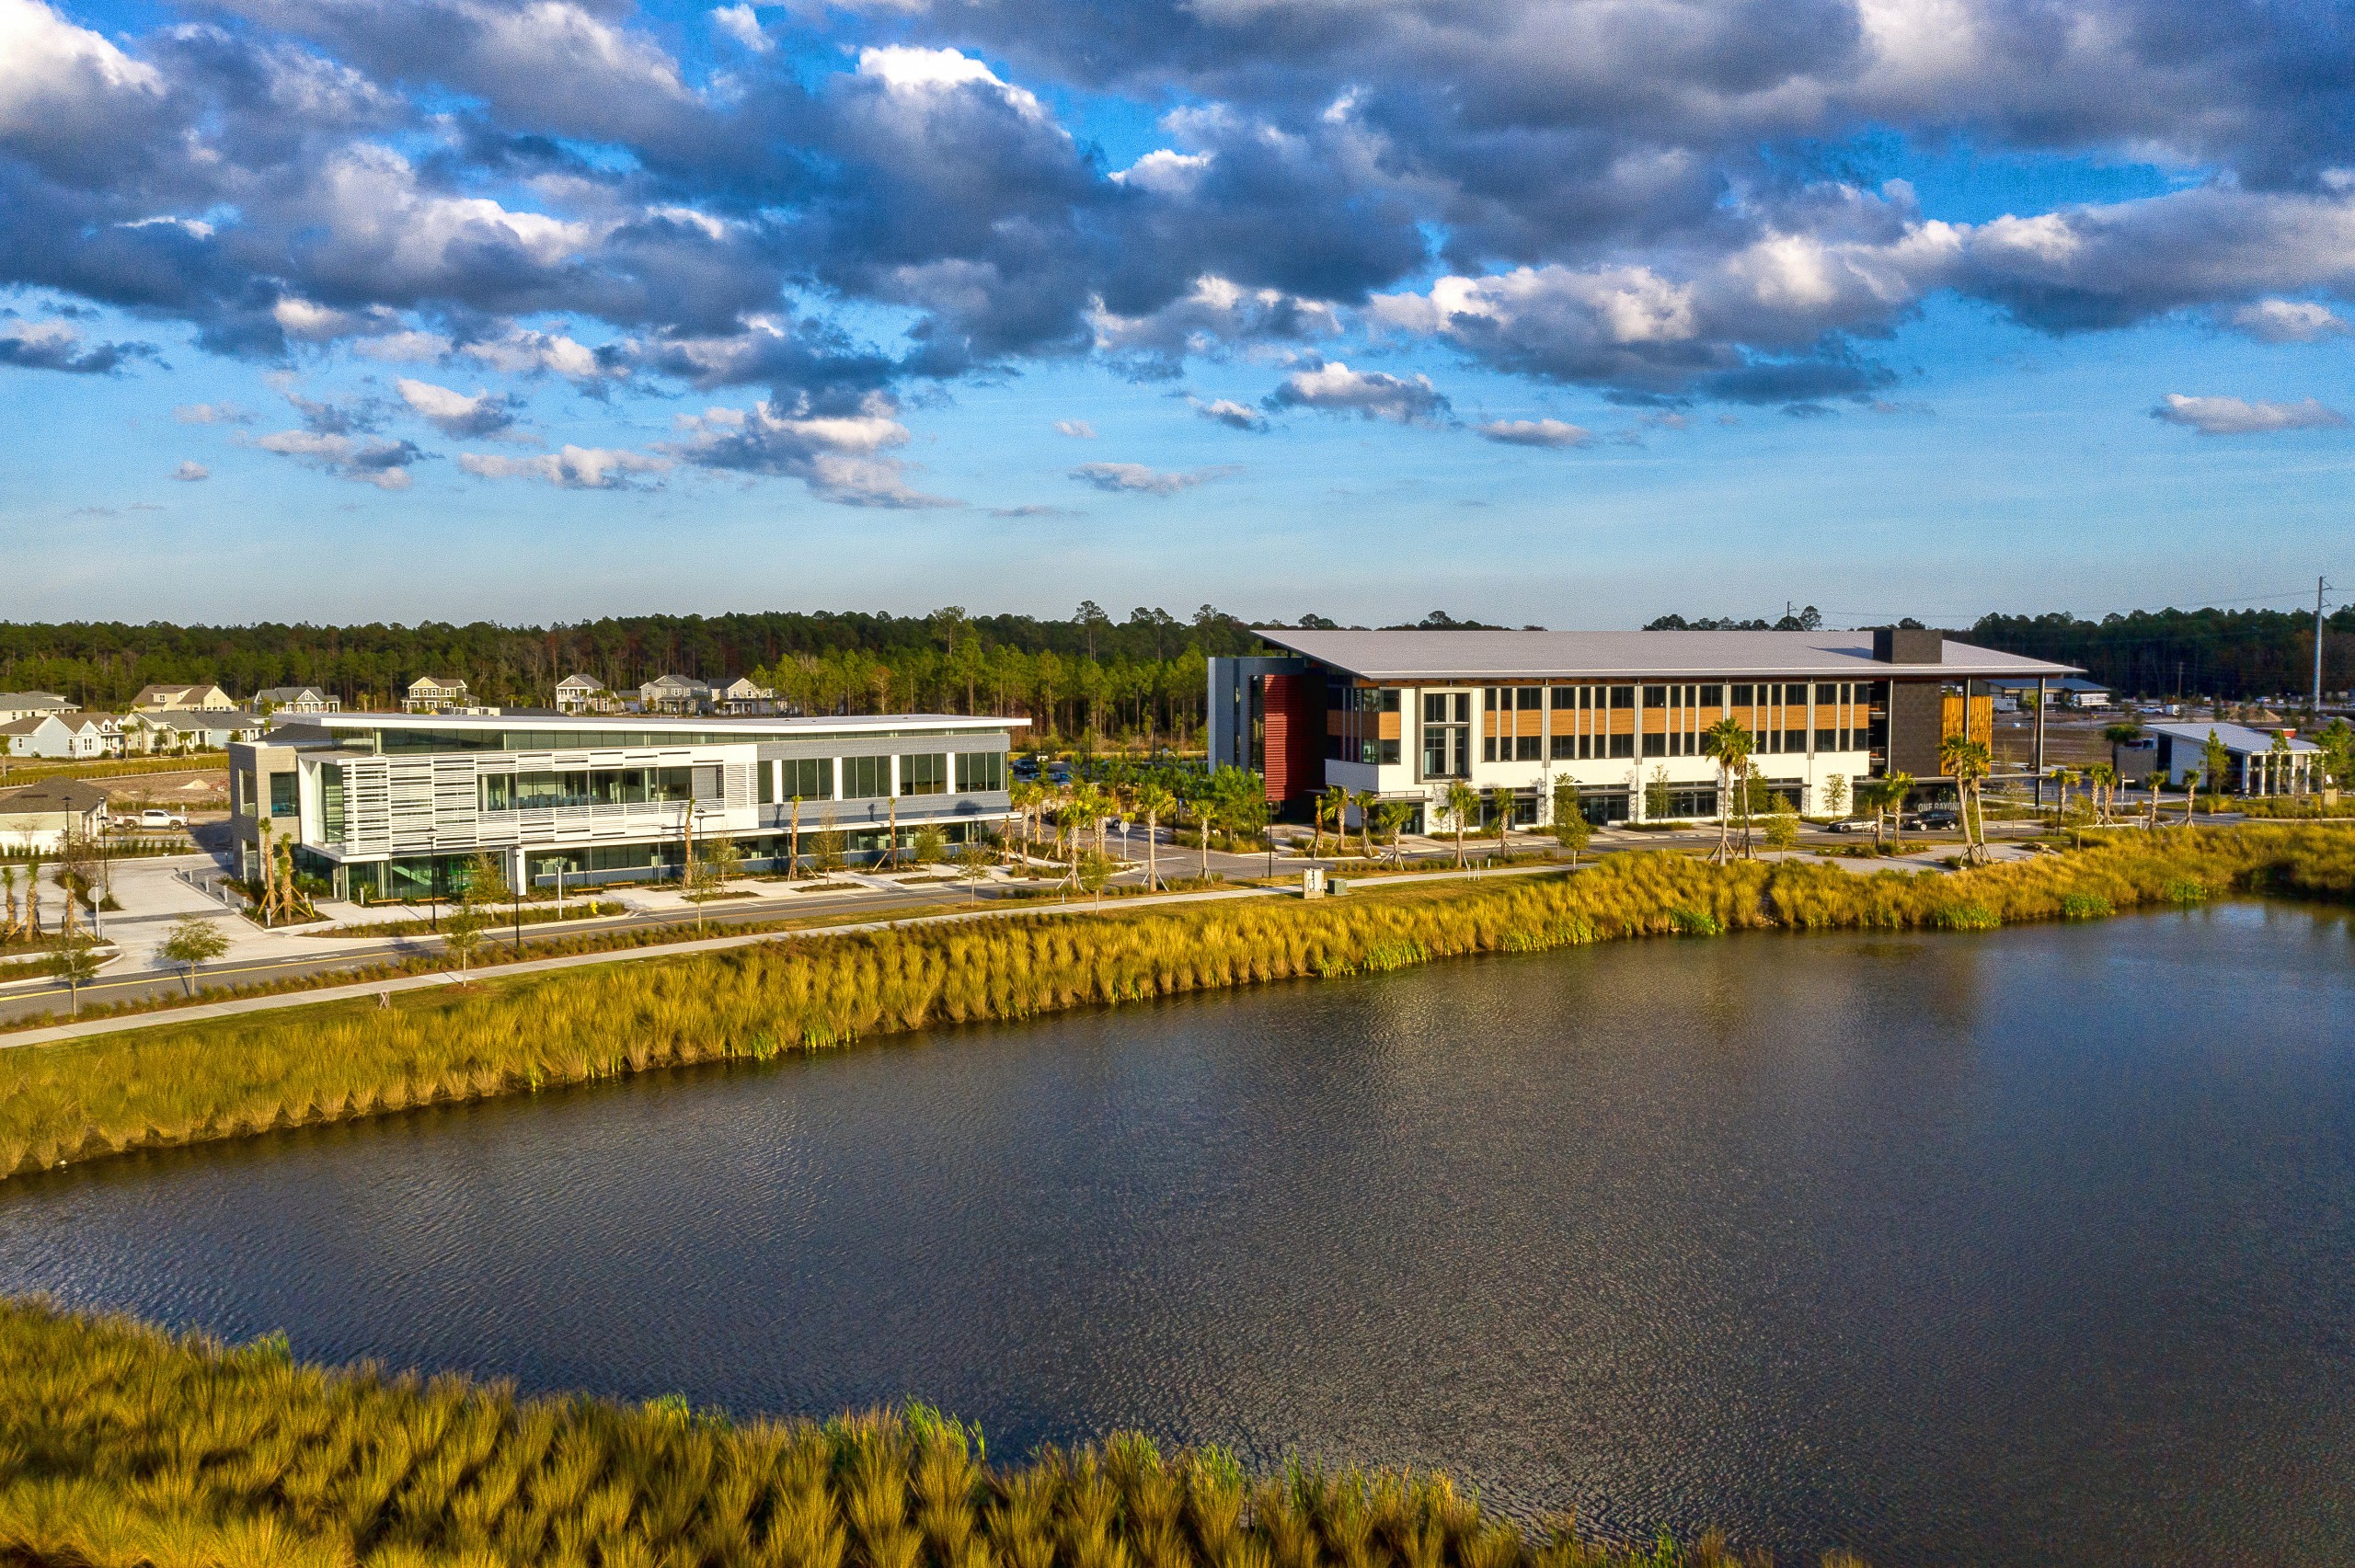 An aerial view of an office building near a pond.